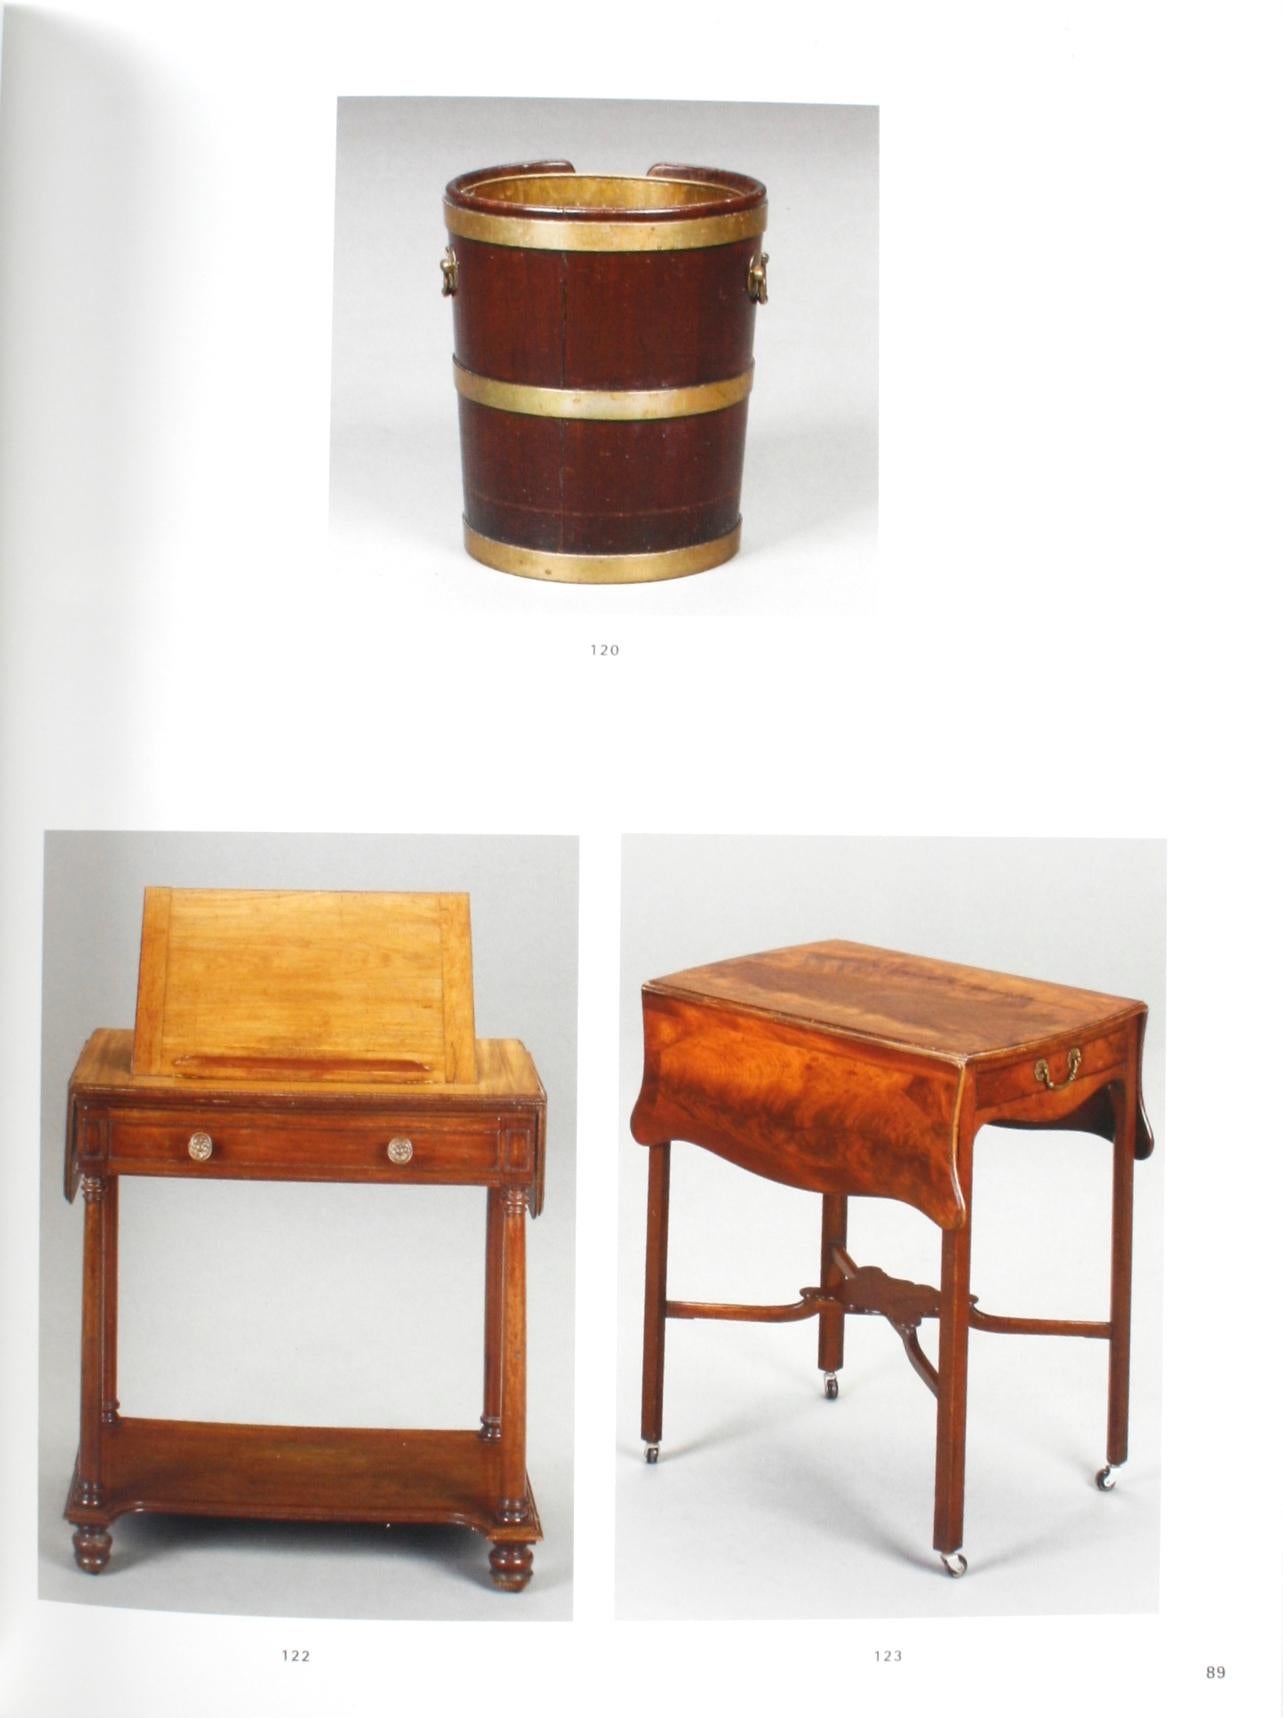 Christie's Important English Furniture, from Collections Peter Glenville For Sale 4